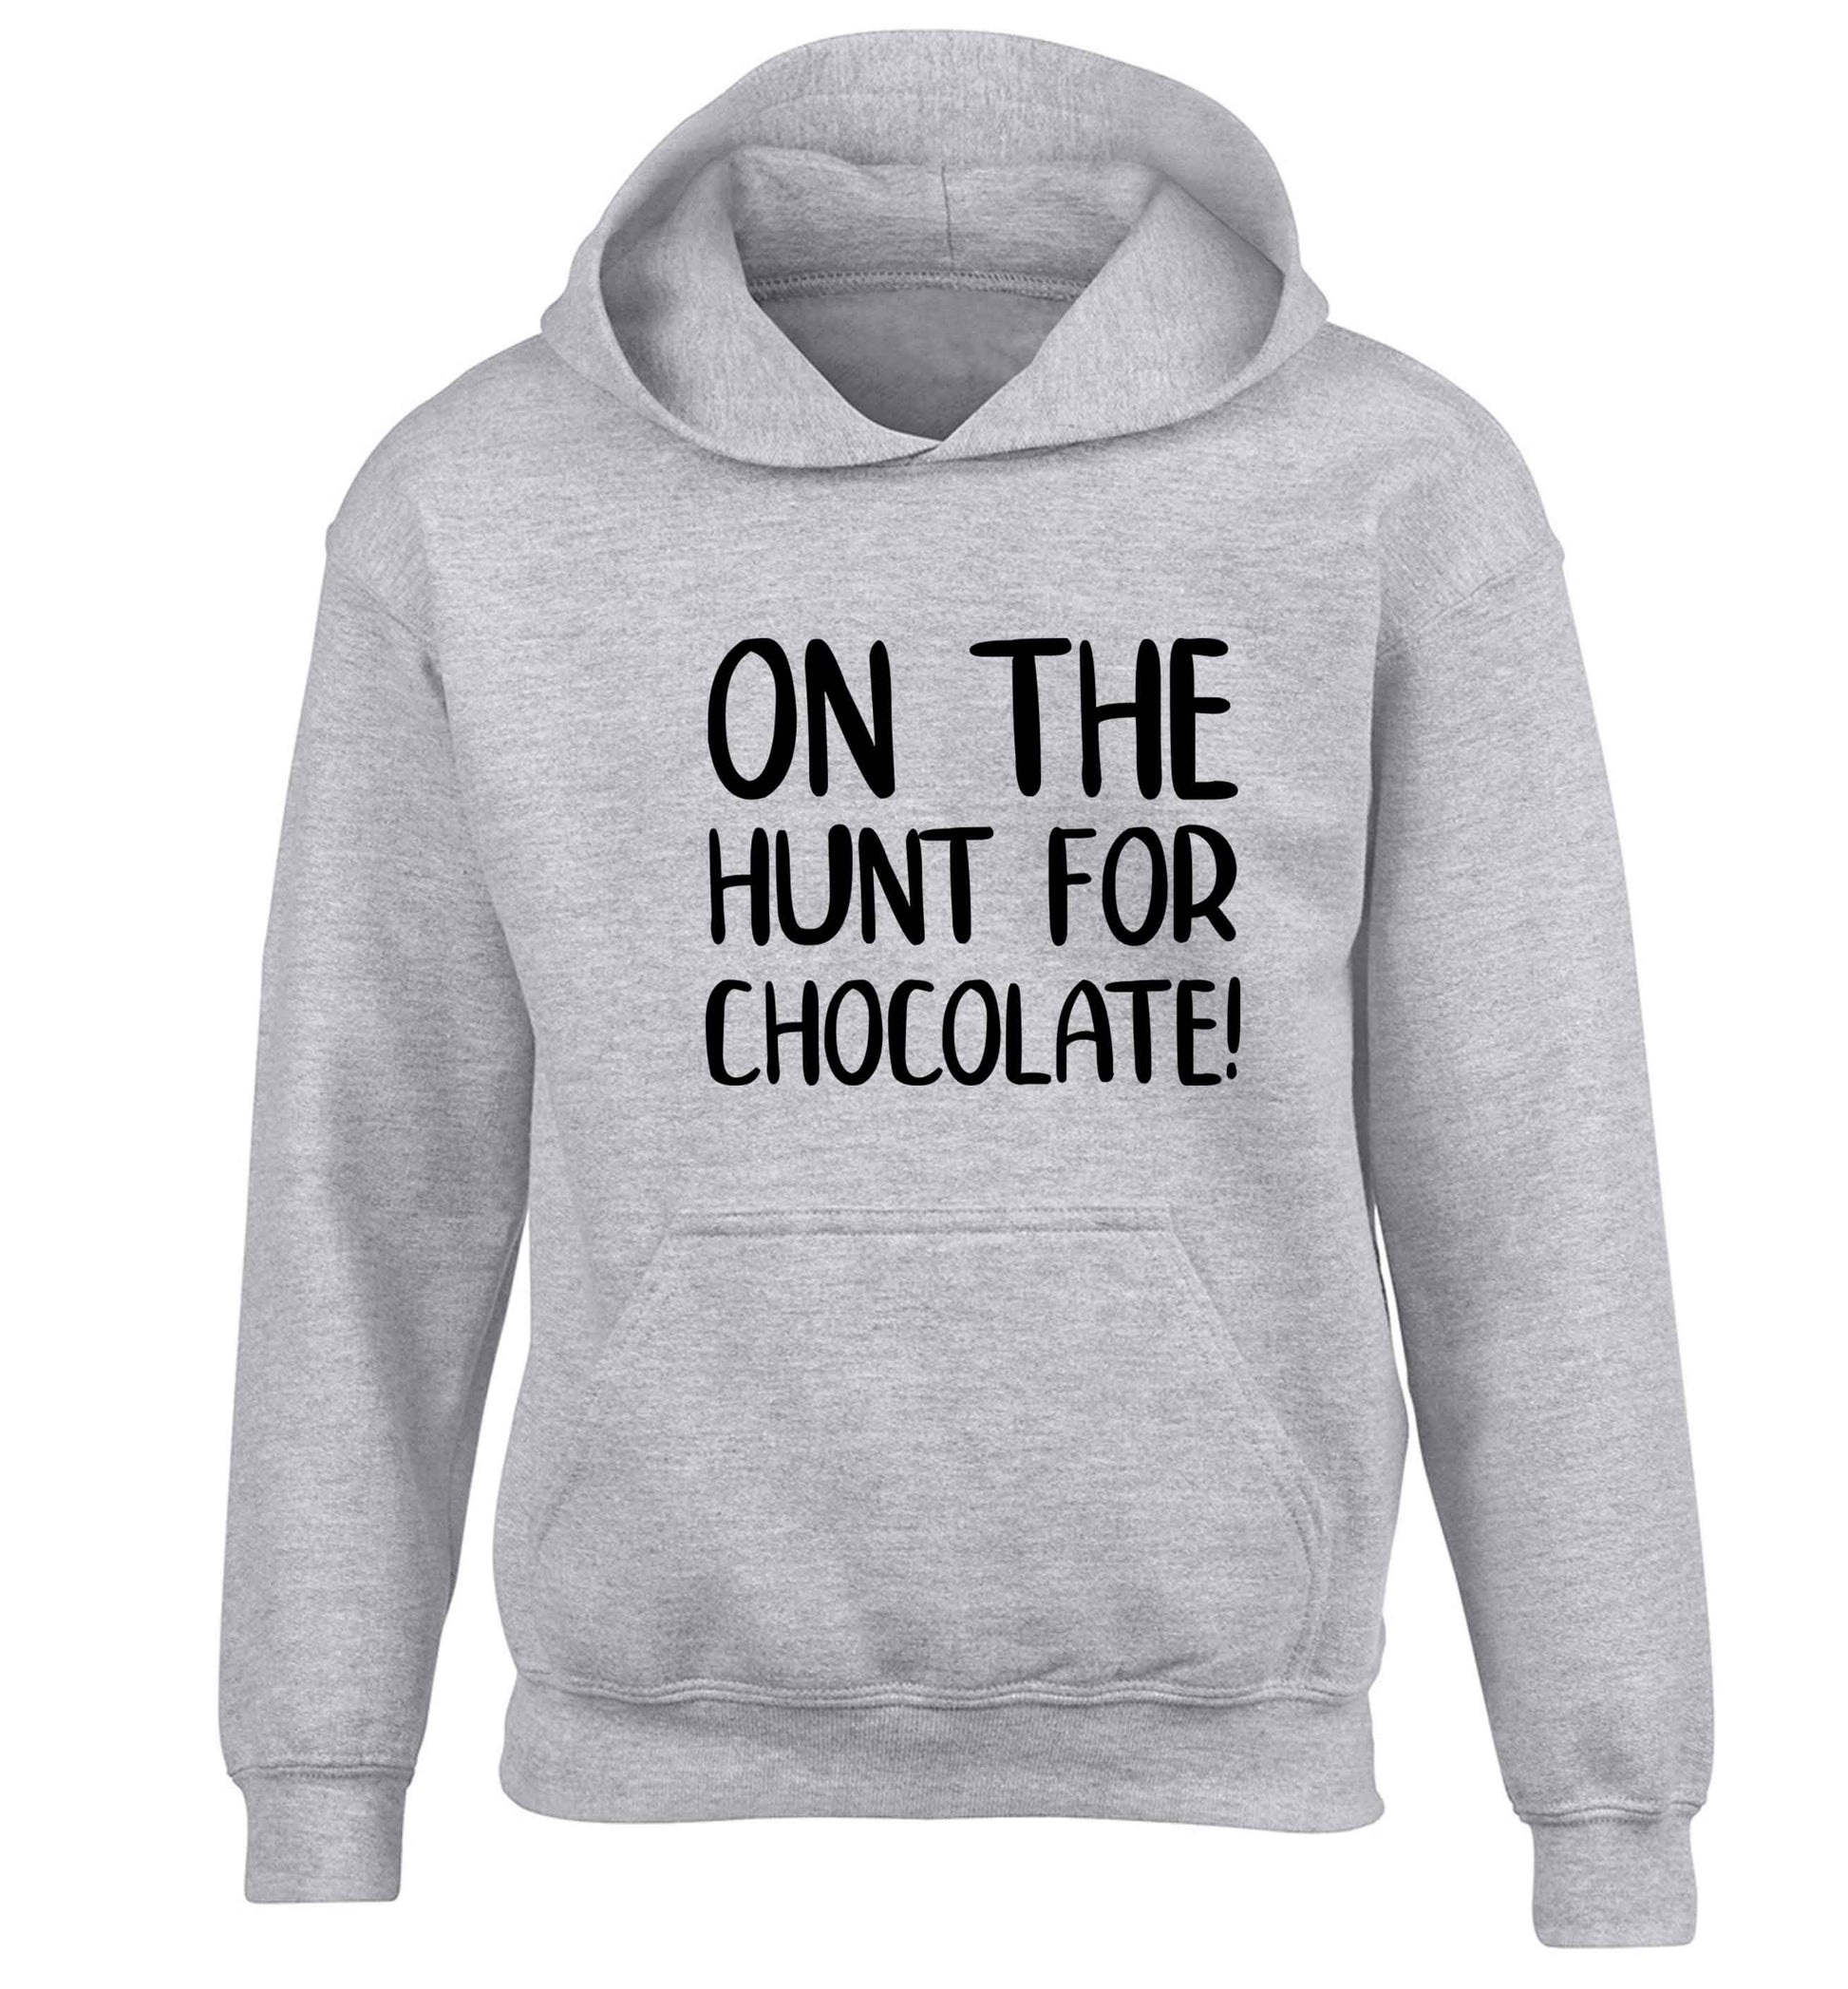 On the hunt for chocolate! children's grey hoodie 12-13 Years